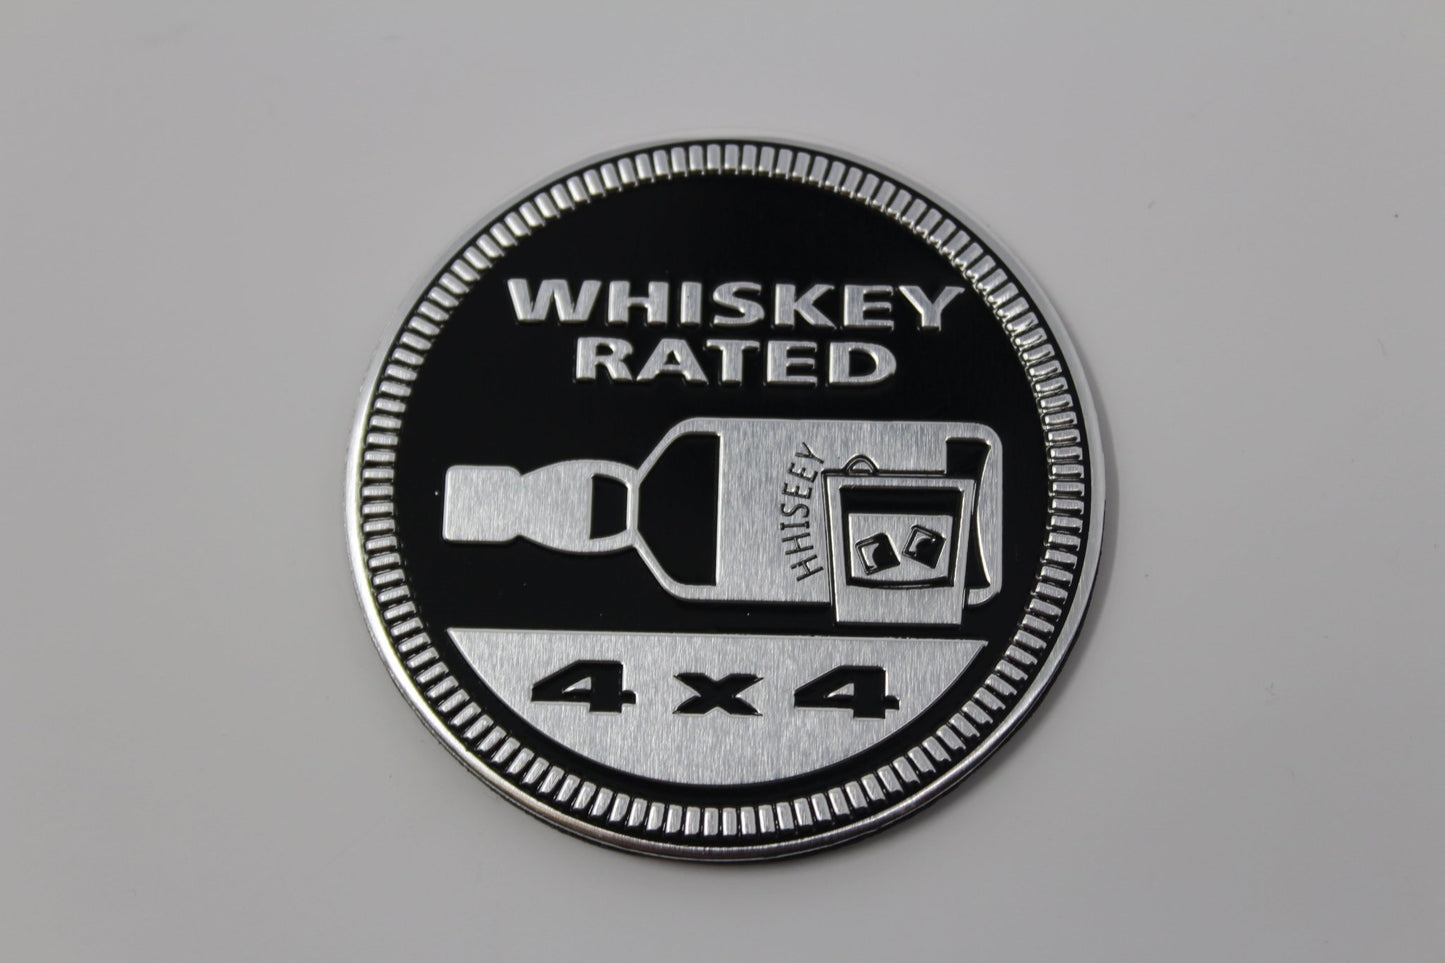 Whiskey Rated Jeep 4x4 3D Aluminum Badge - Jeep Vehicle Decor Accessory Sets